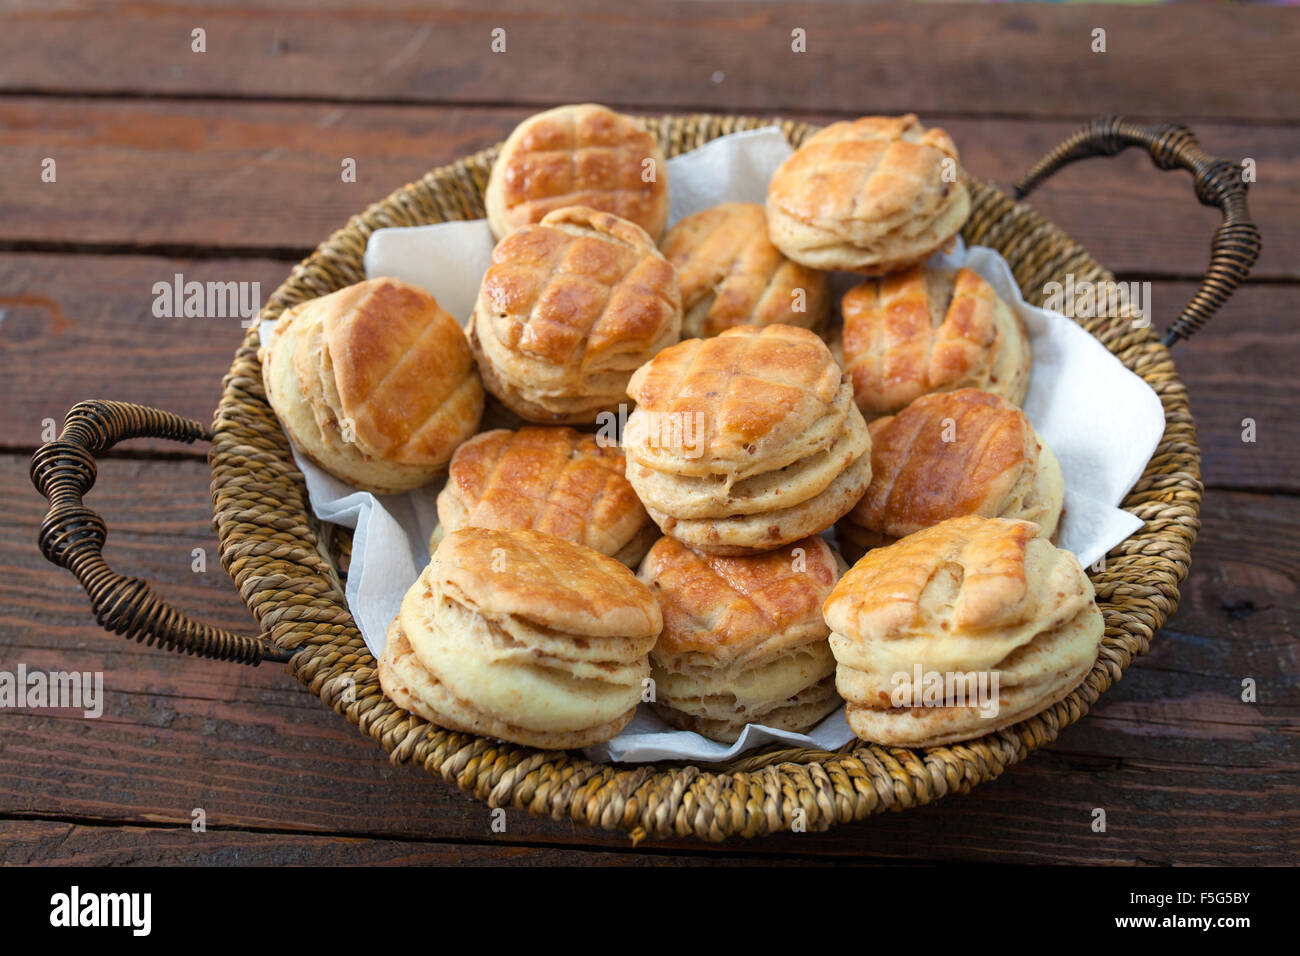 Small Bread Stuffed With Crackling Stock Photo